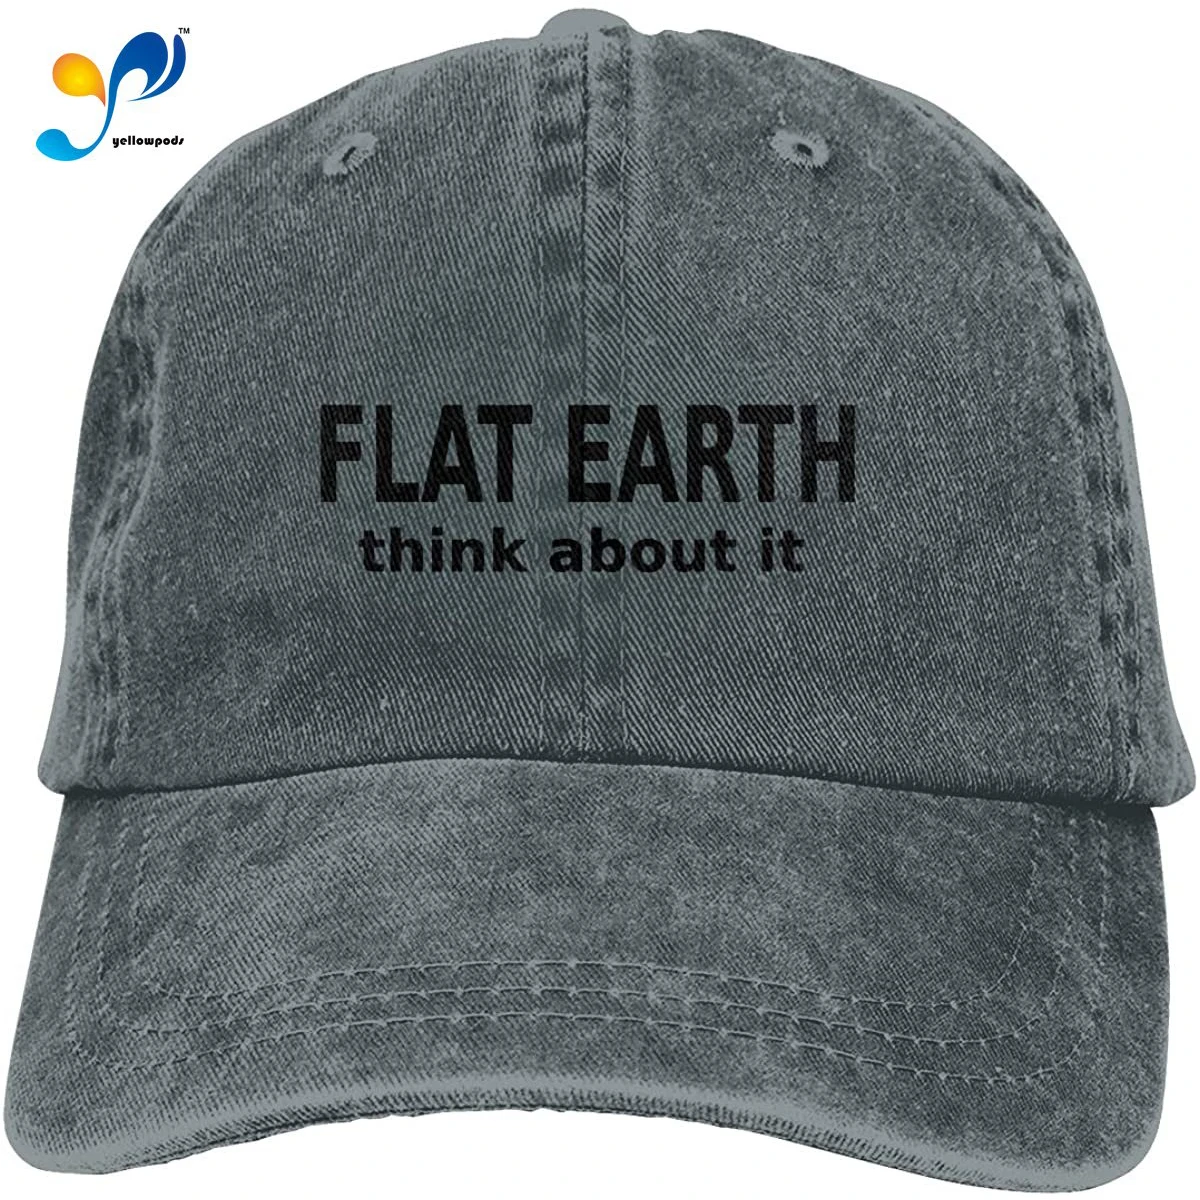 

Flat Earth Think About It Vintage Washed Twill Baseball Cap Adjustable Hat Funny Humor Irony Graphics Of Adult Gift Deep Heather